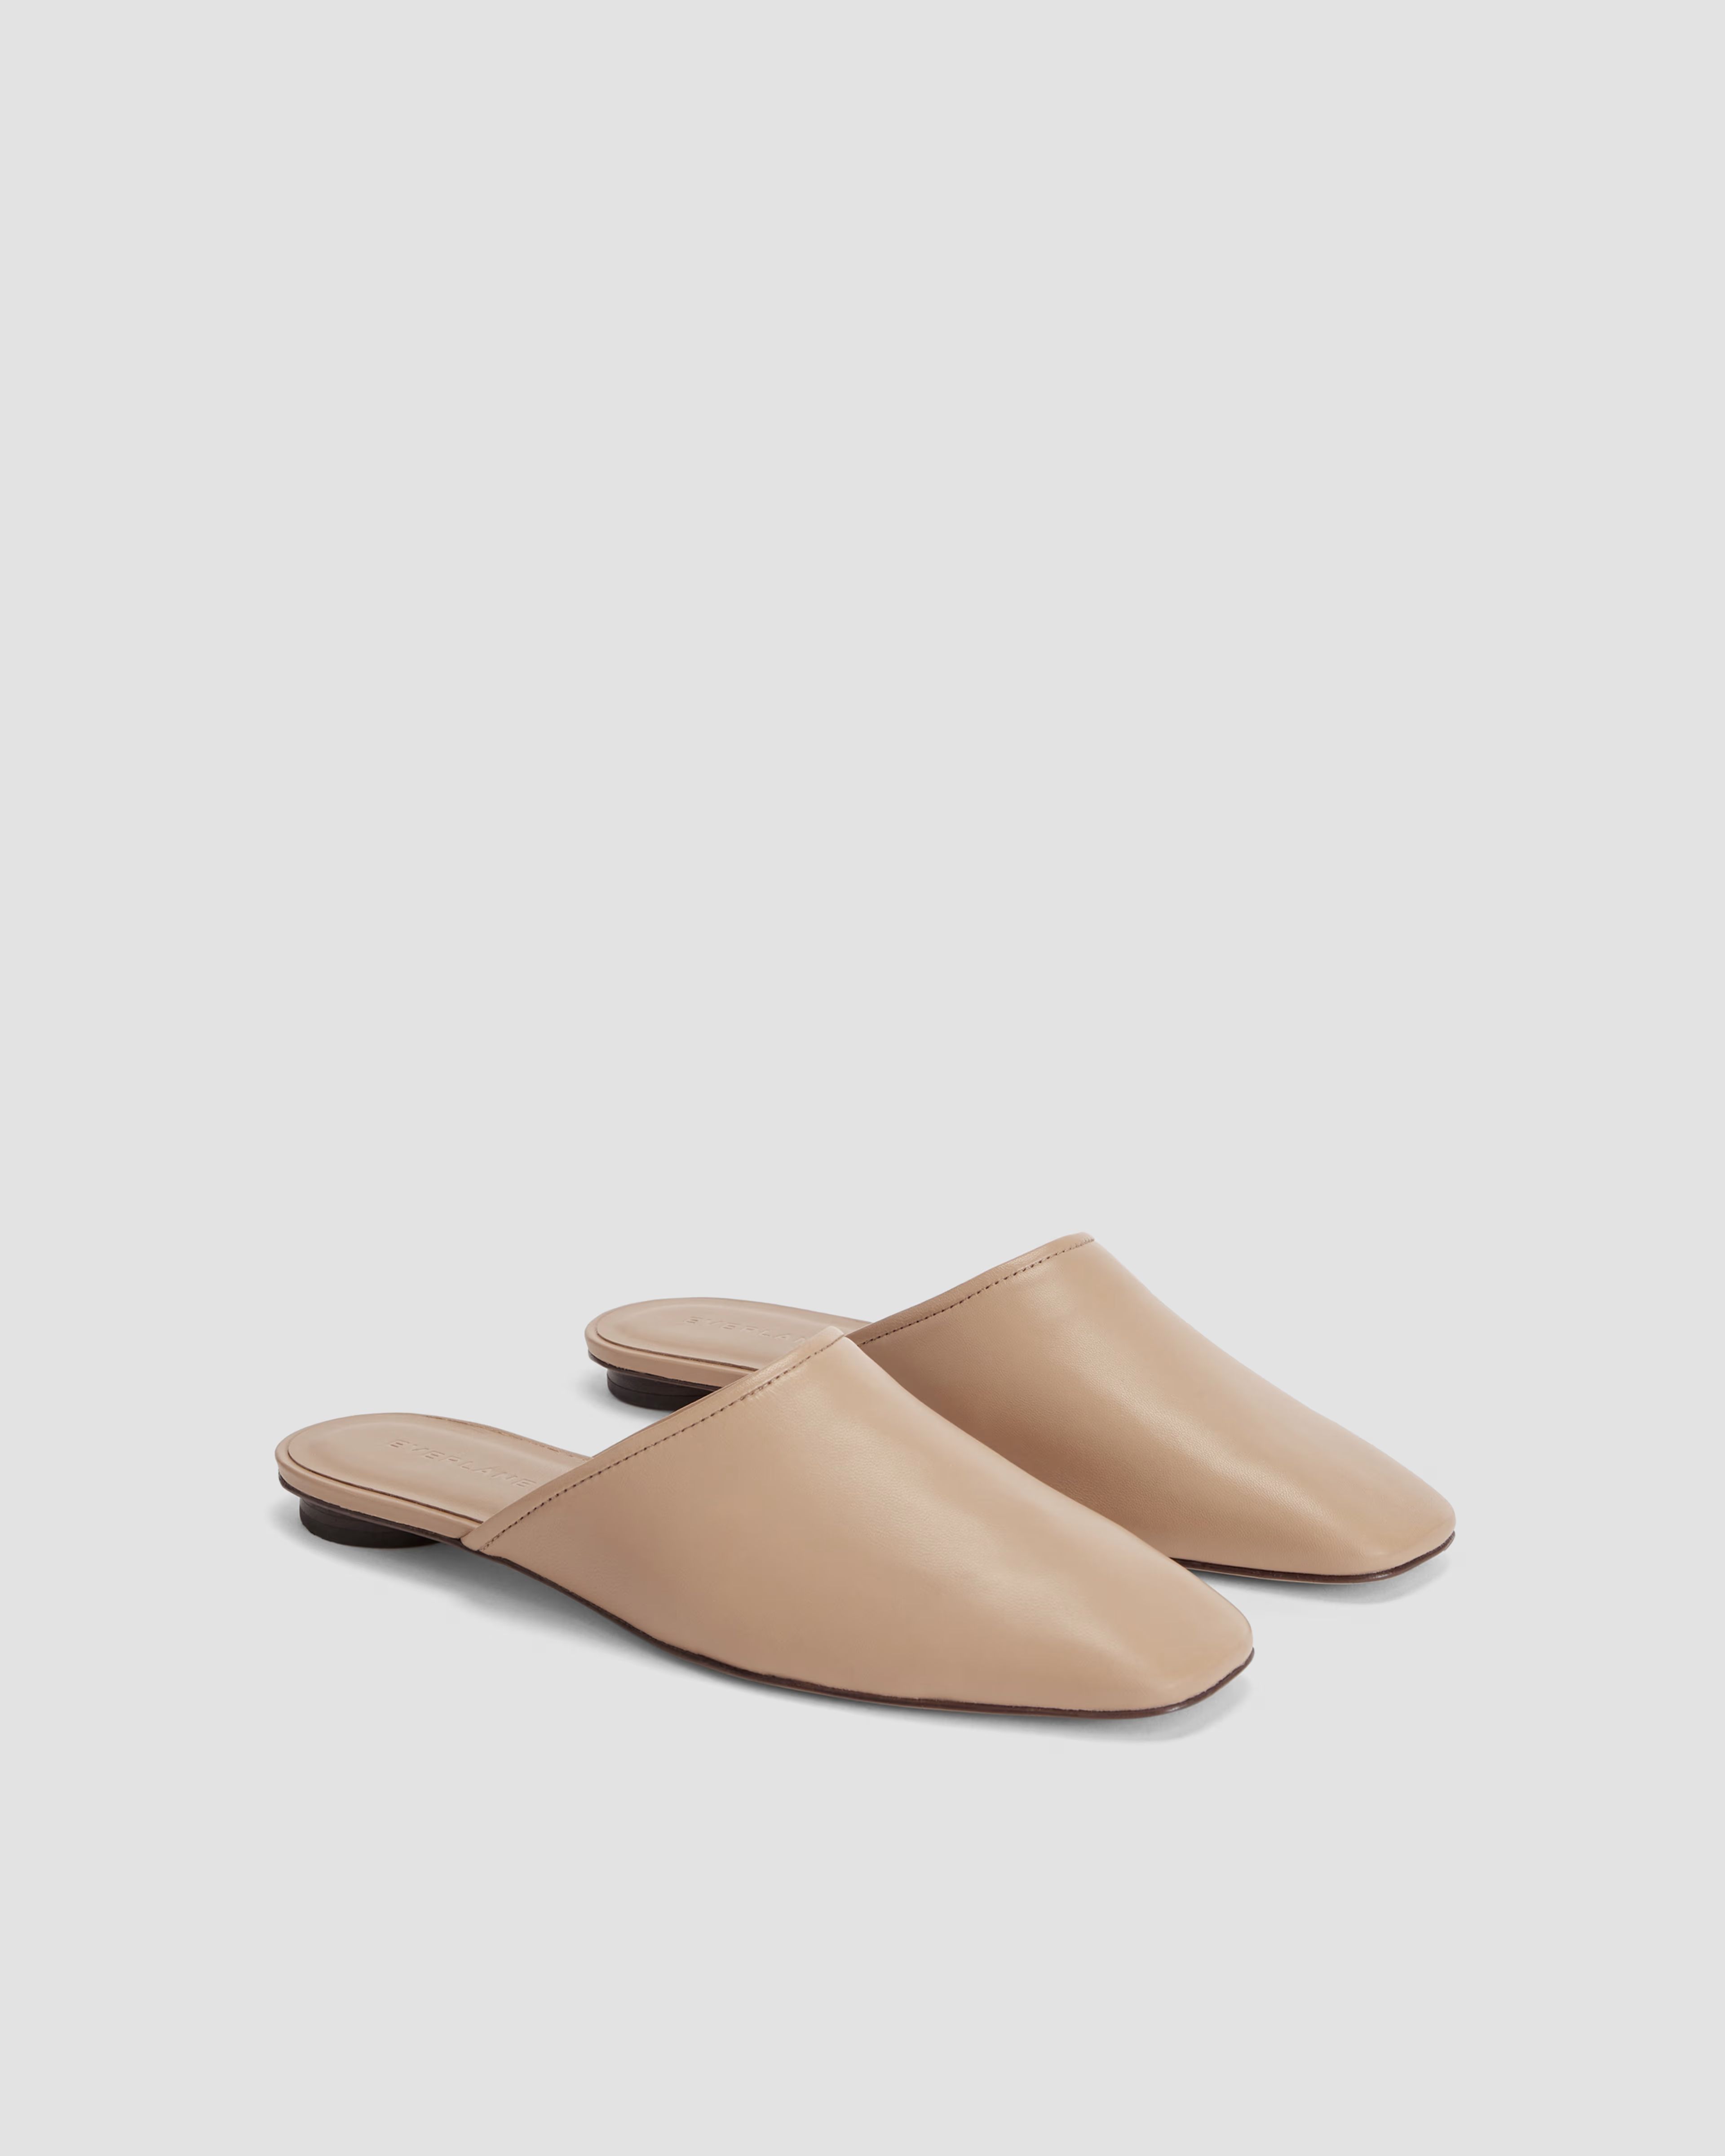 The Day Mule | Everlane